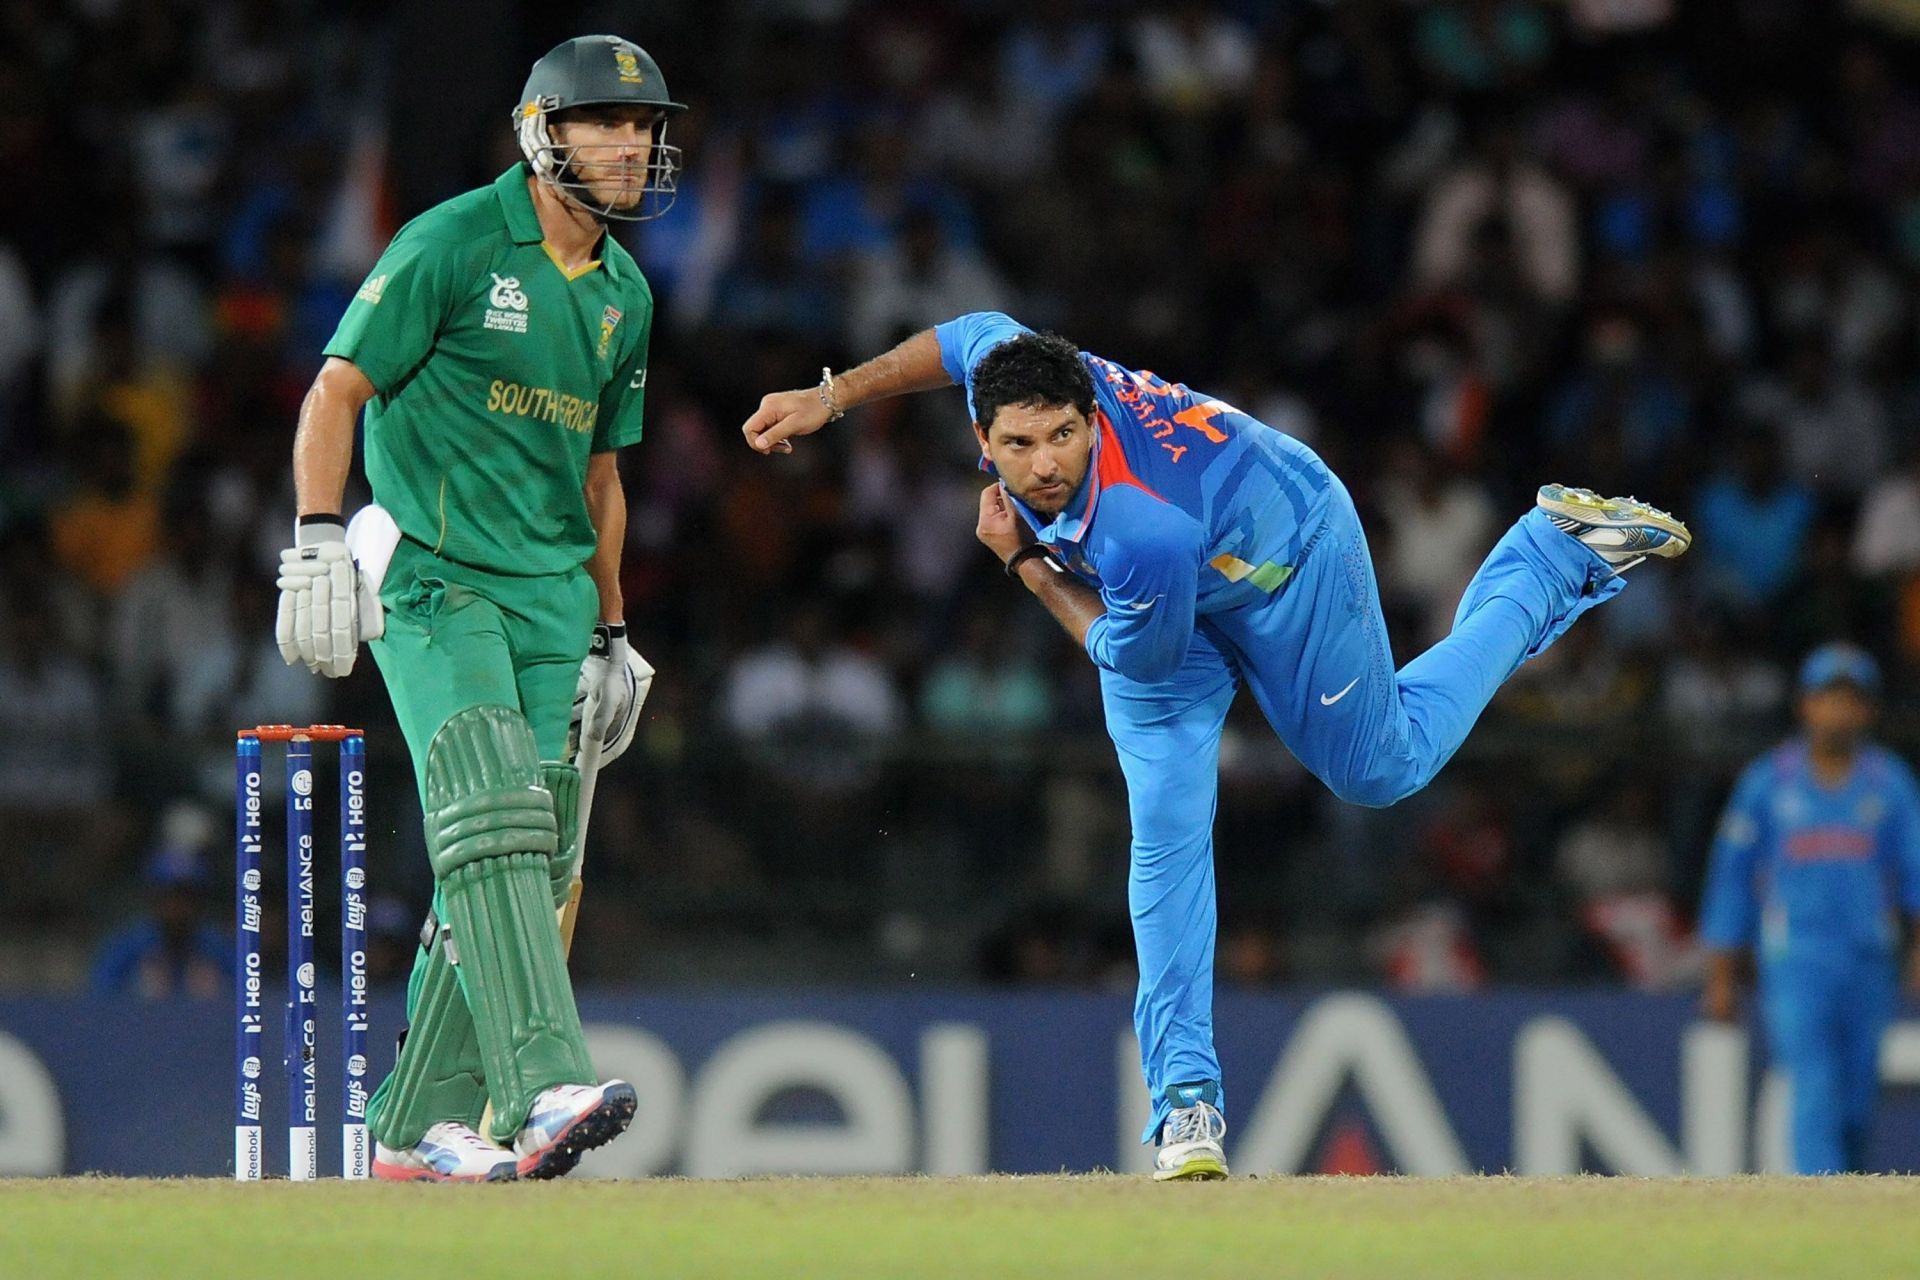 Yuvraj Singh bowls during the Super Eight match between India and South Africa in 2012. Pic: Getty Images